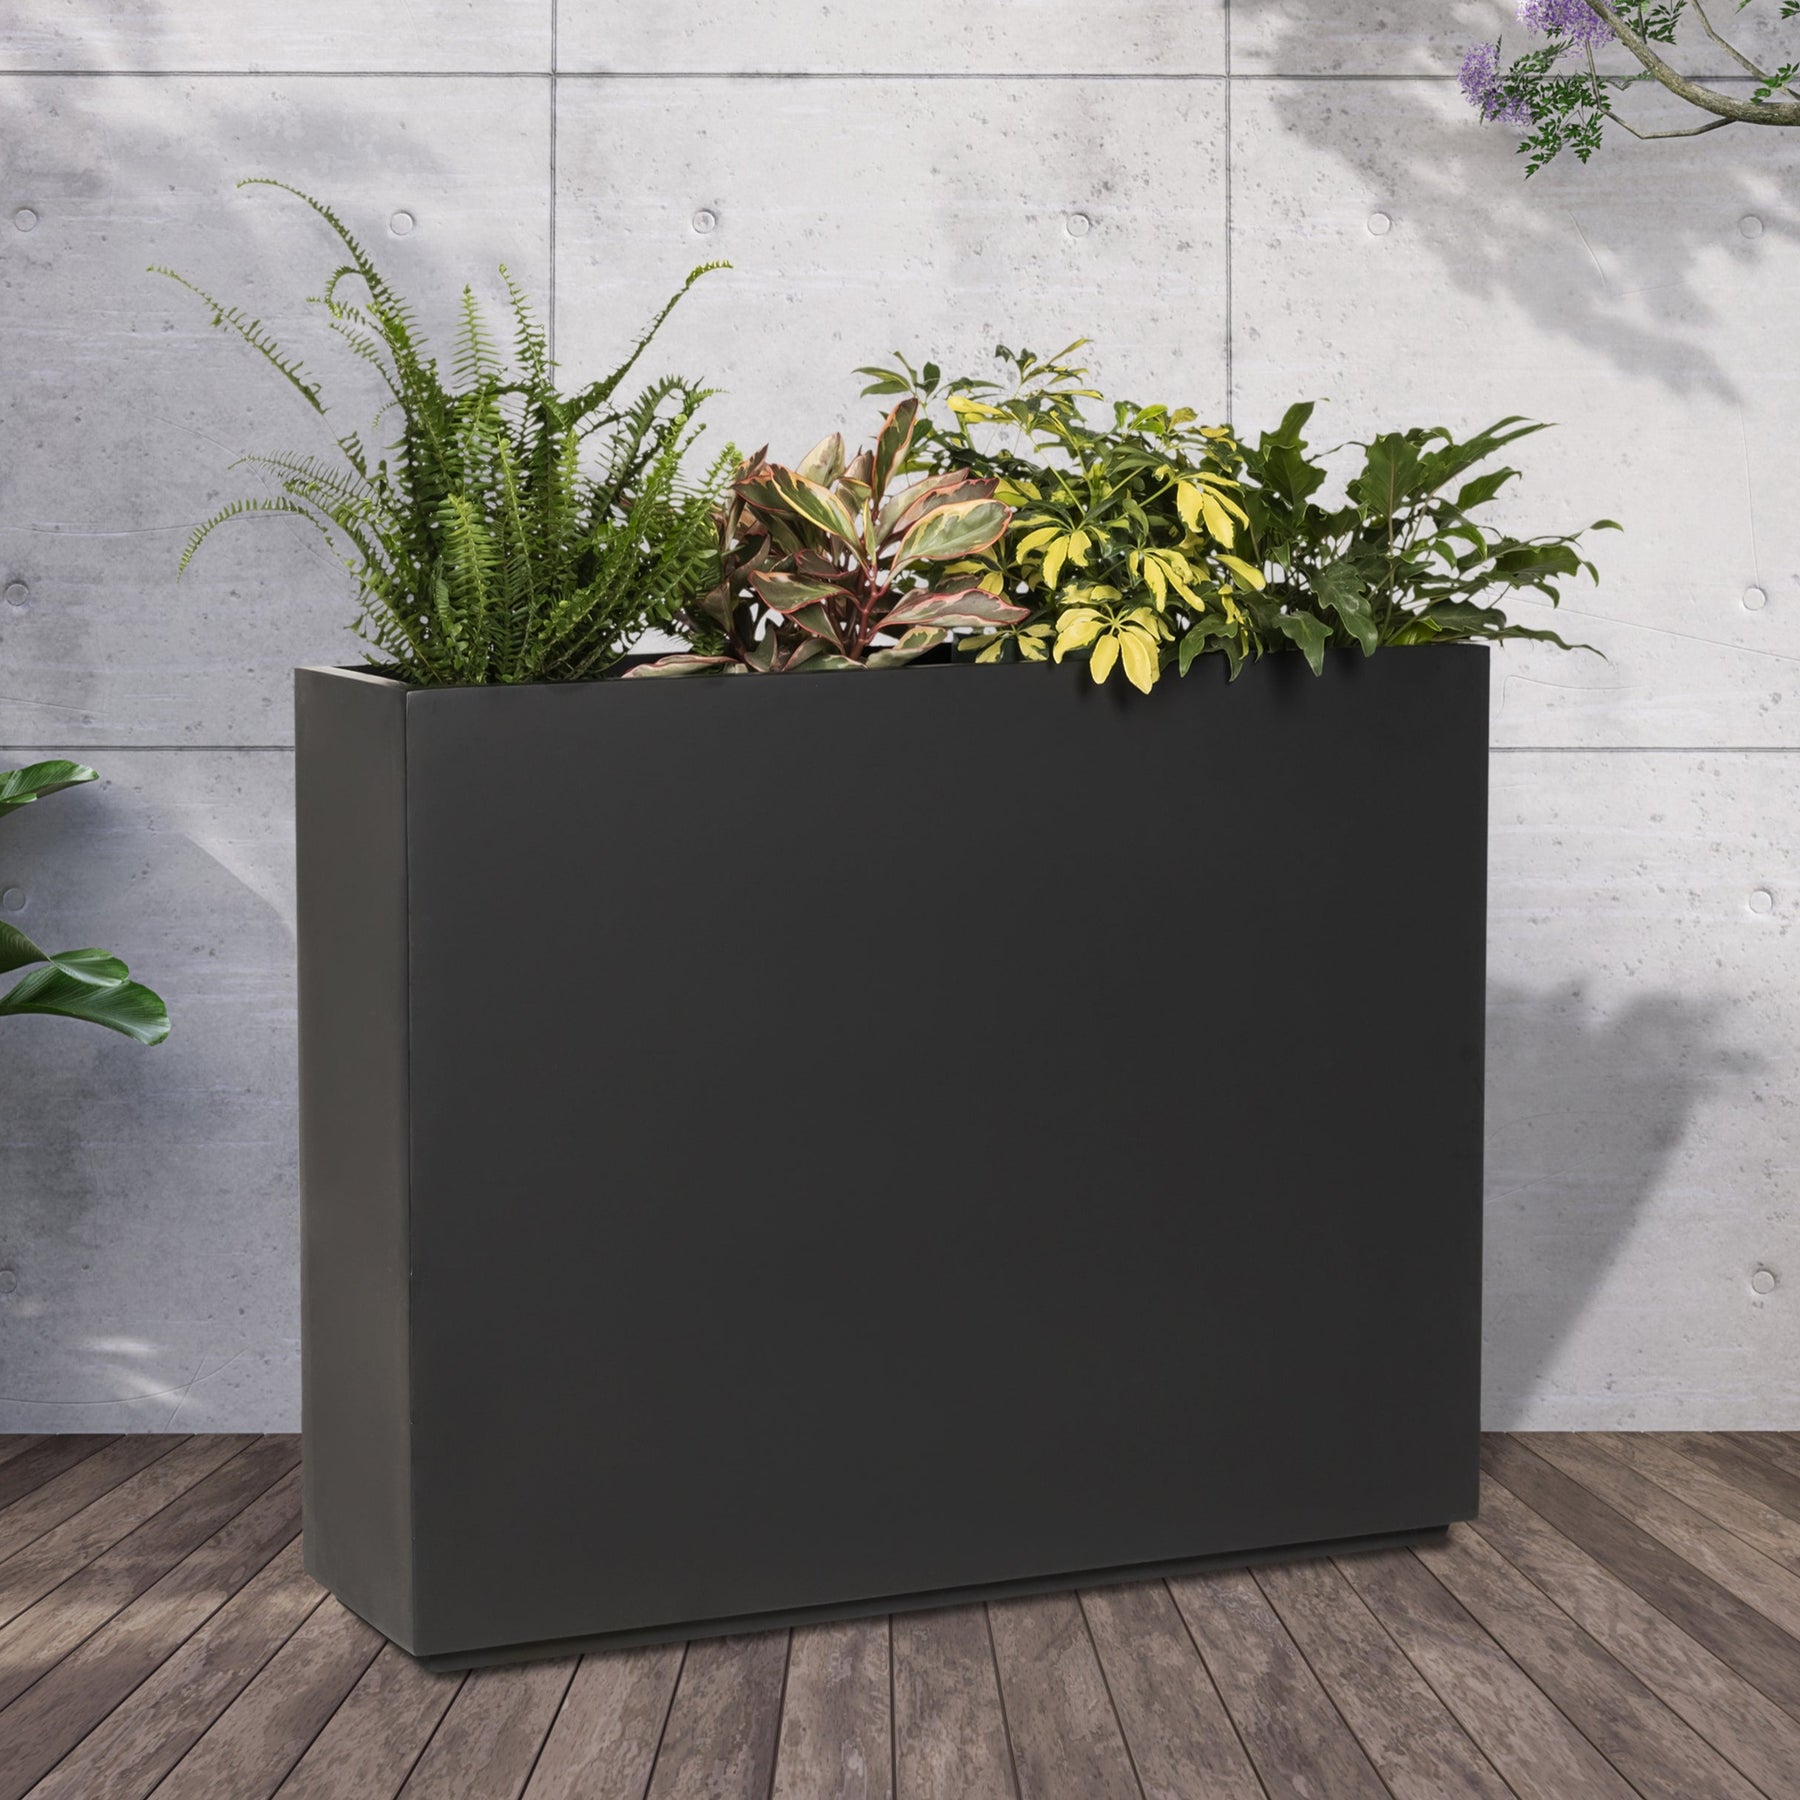 Aster. Tall Planter Box, Large Black Divider Planter, Rectangular Plant Pot.  29 T, 38 Wide, Narrow. Outdoor, Indoor w/ Drainage